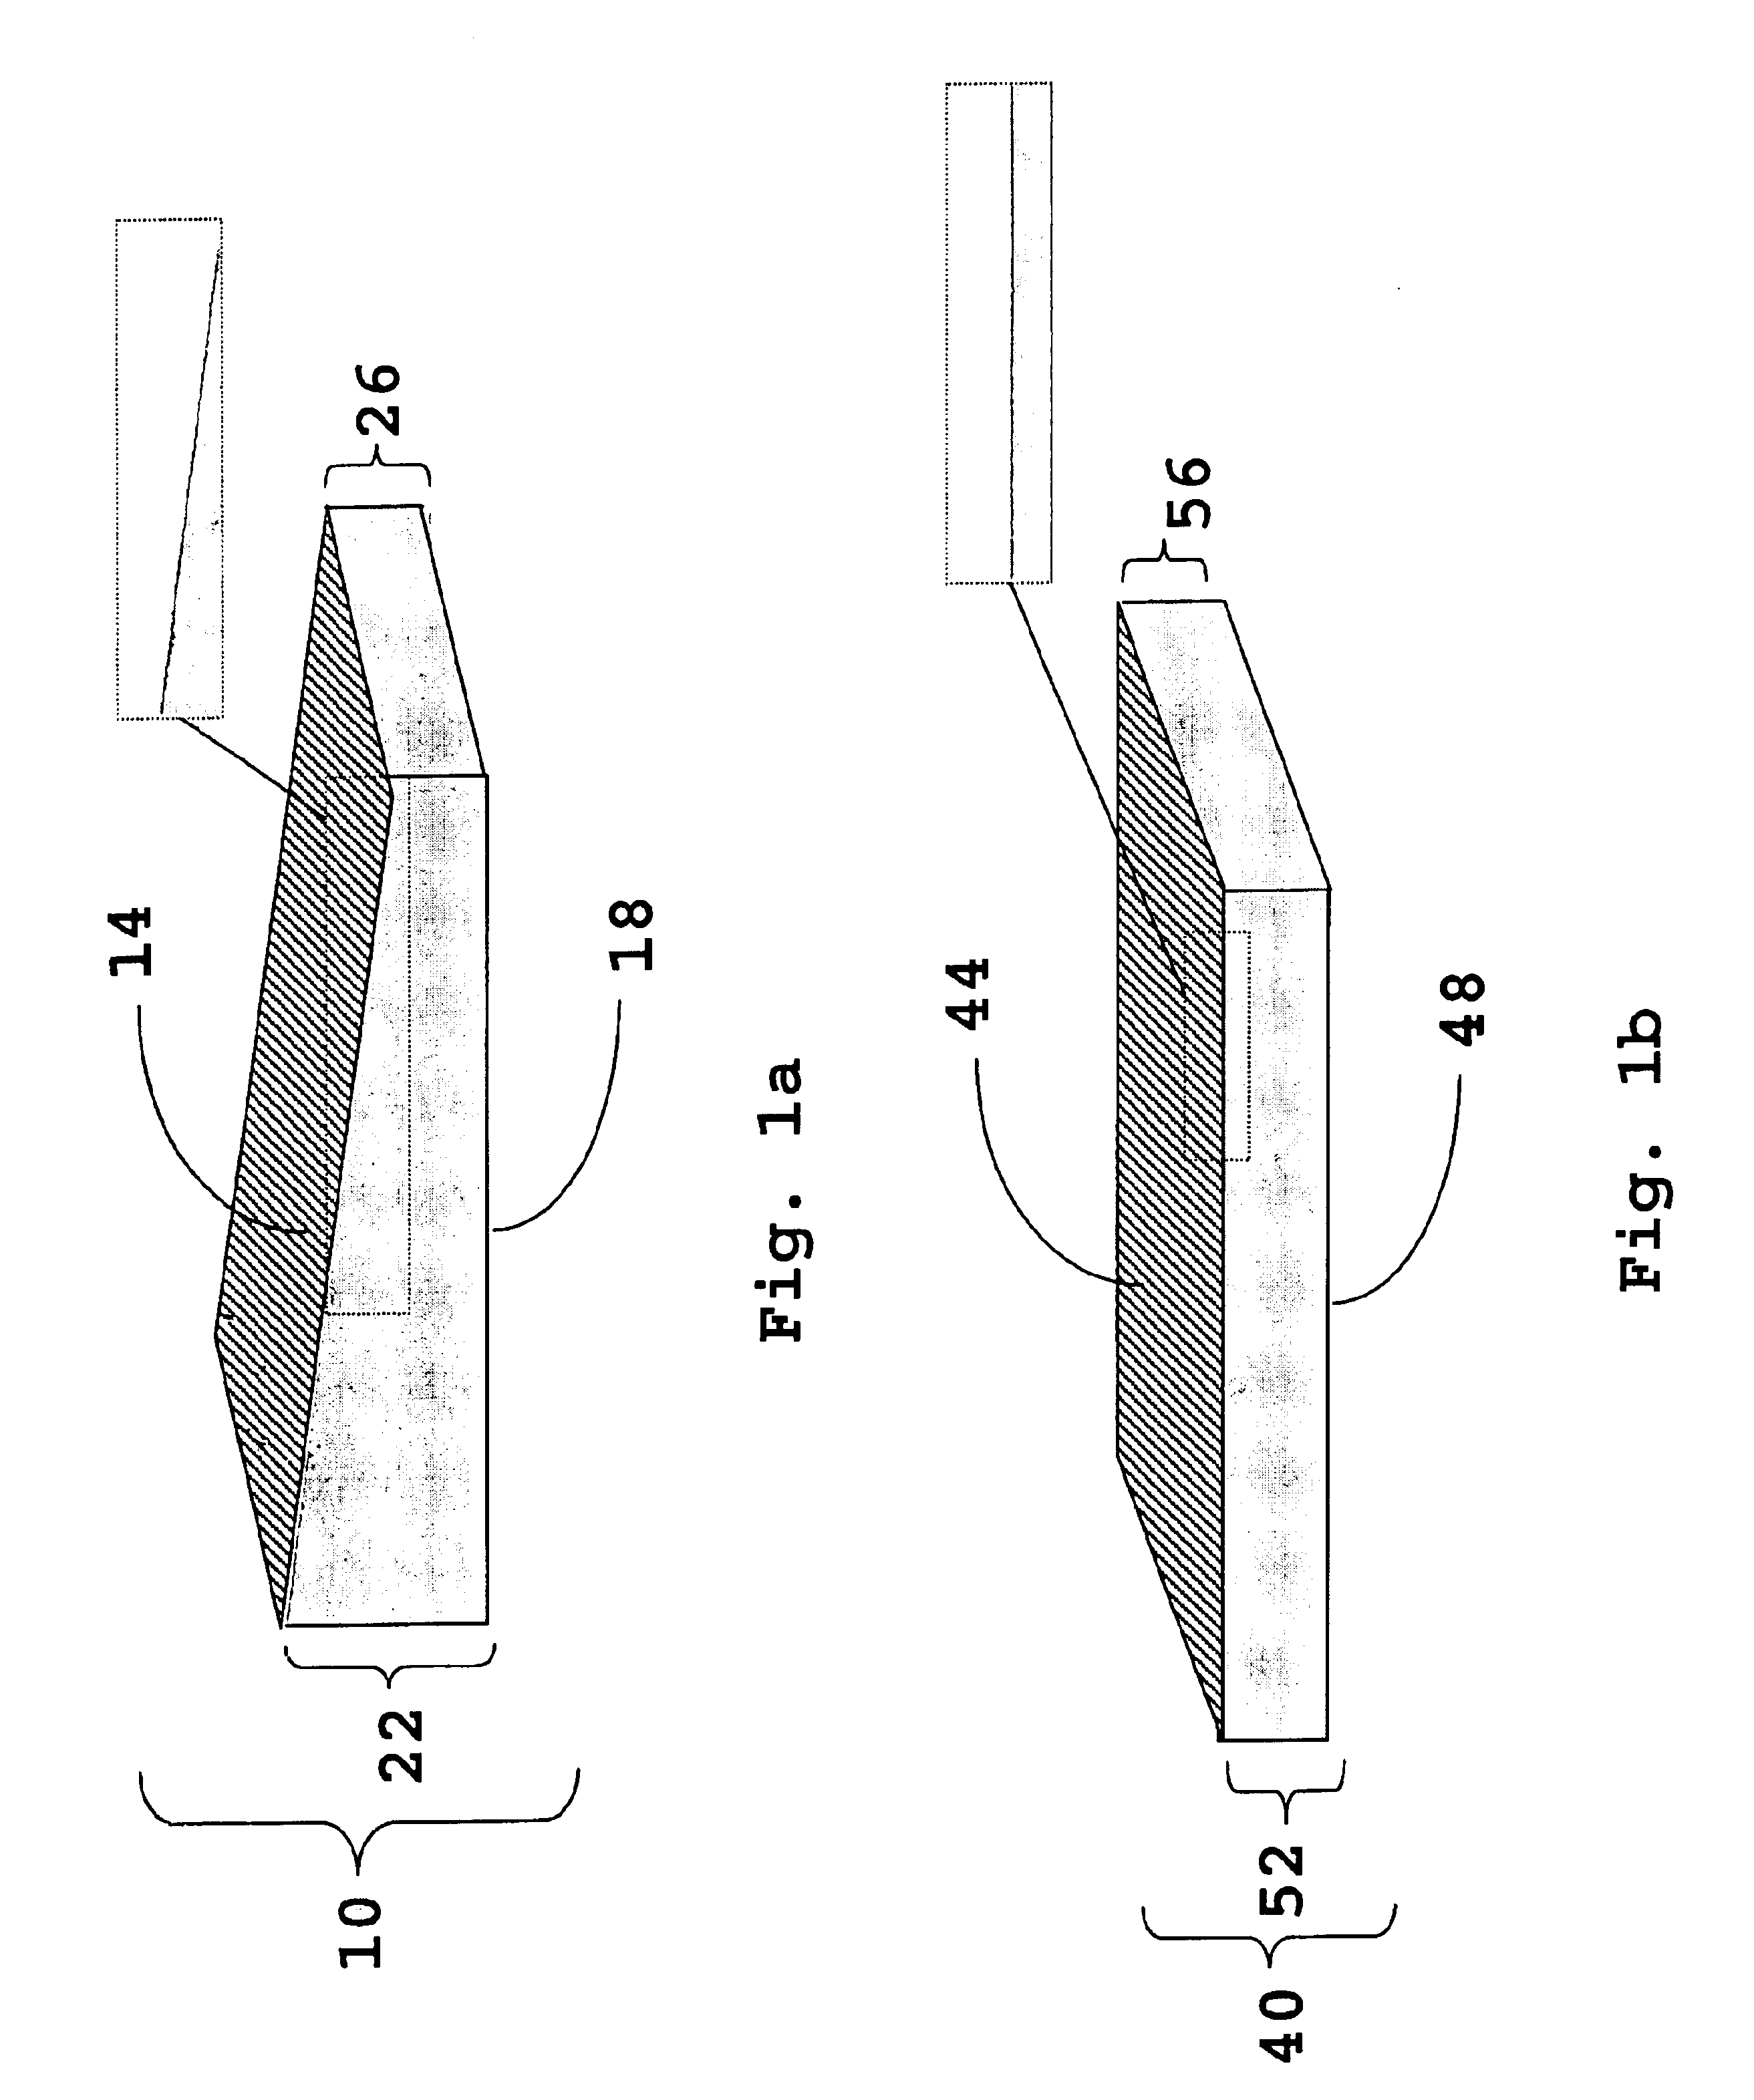 Wafer scale production of optical elements